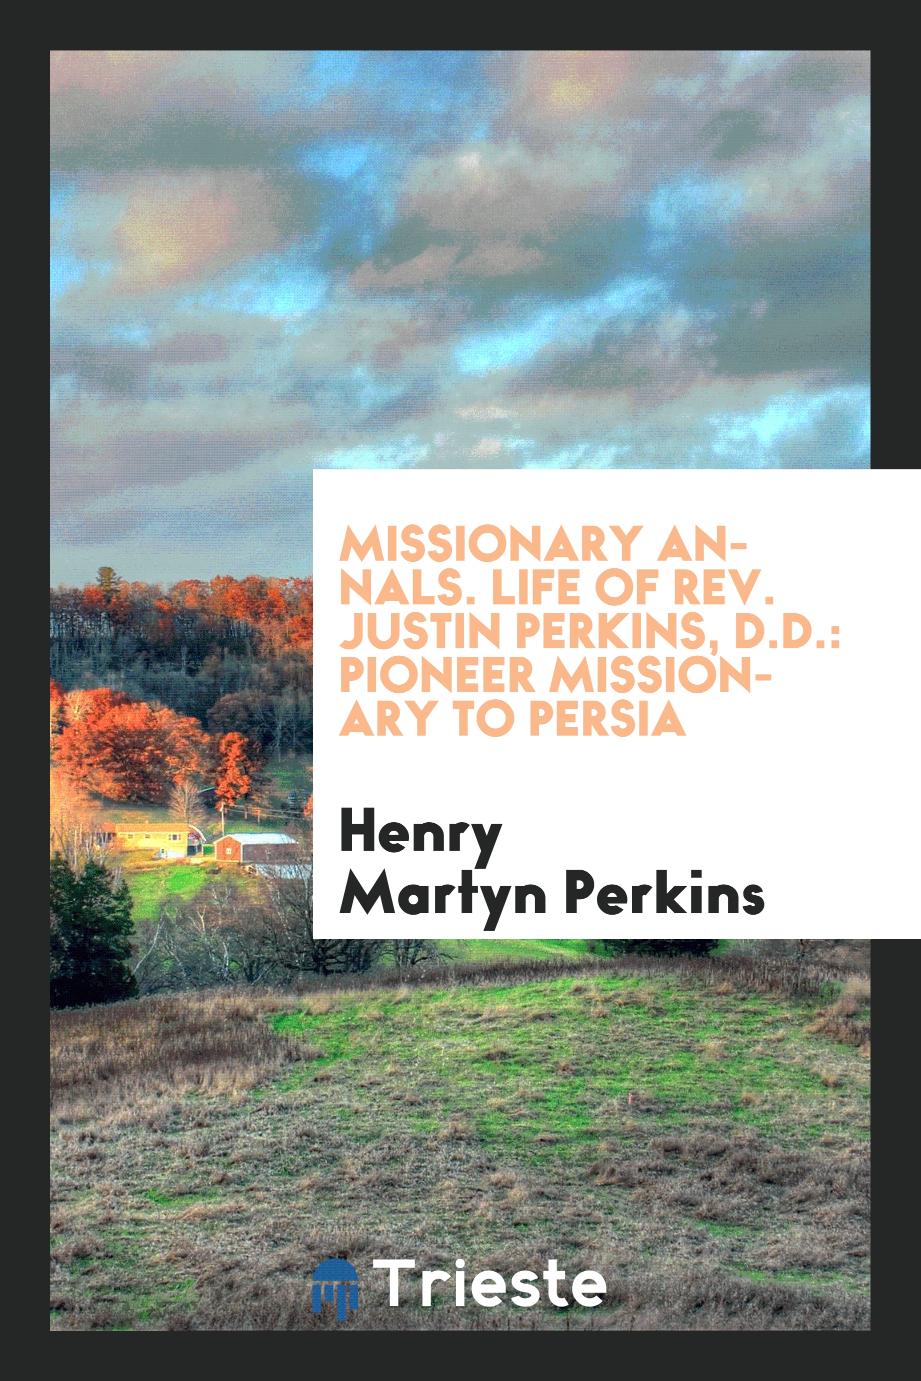 Missionary Annals. Life of Rev. Justin Perkins, D.D.: Pioneer Missionary to Persia